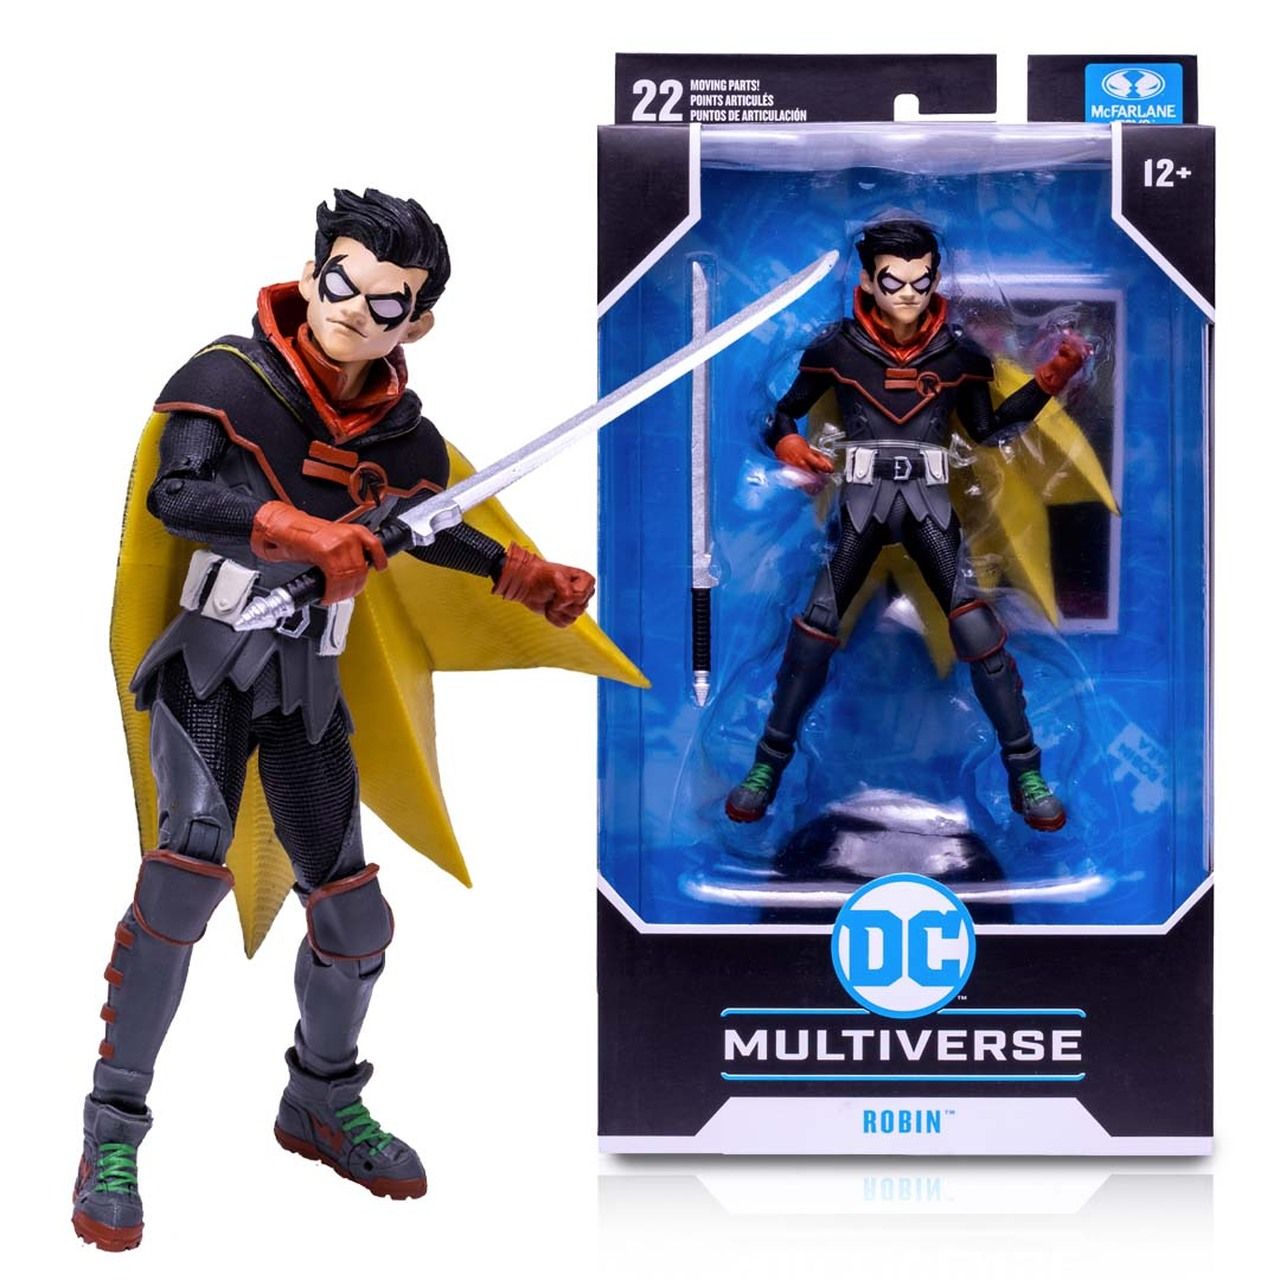 The Infinite Frontier Robin action figure poses with a sword next to its packaging.